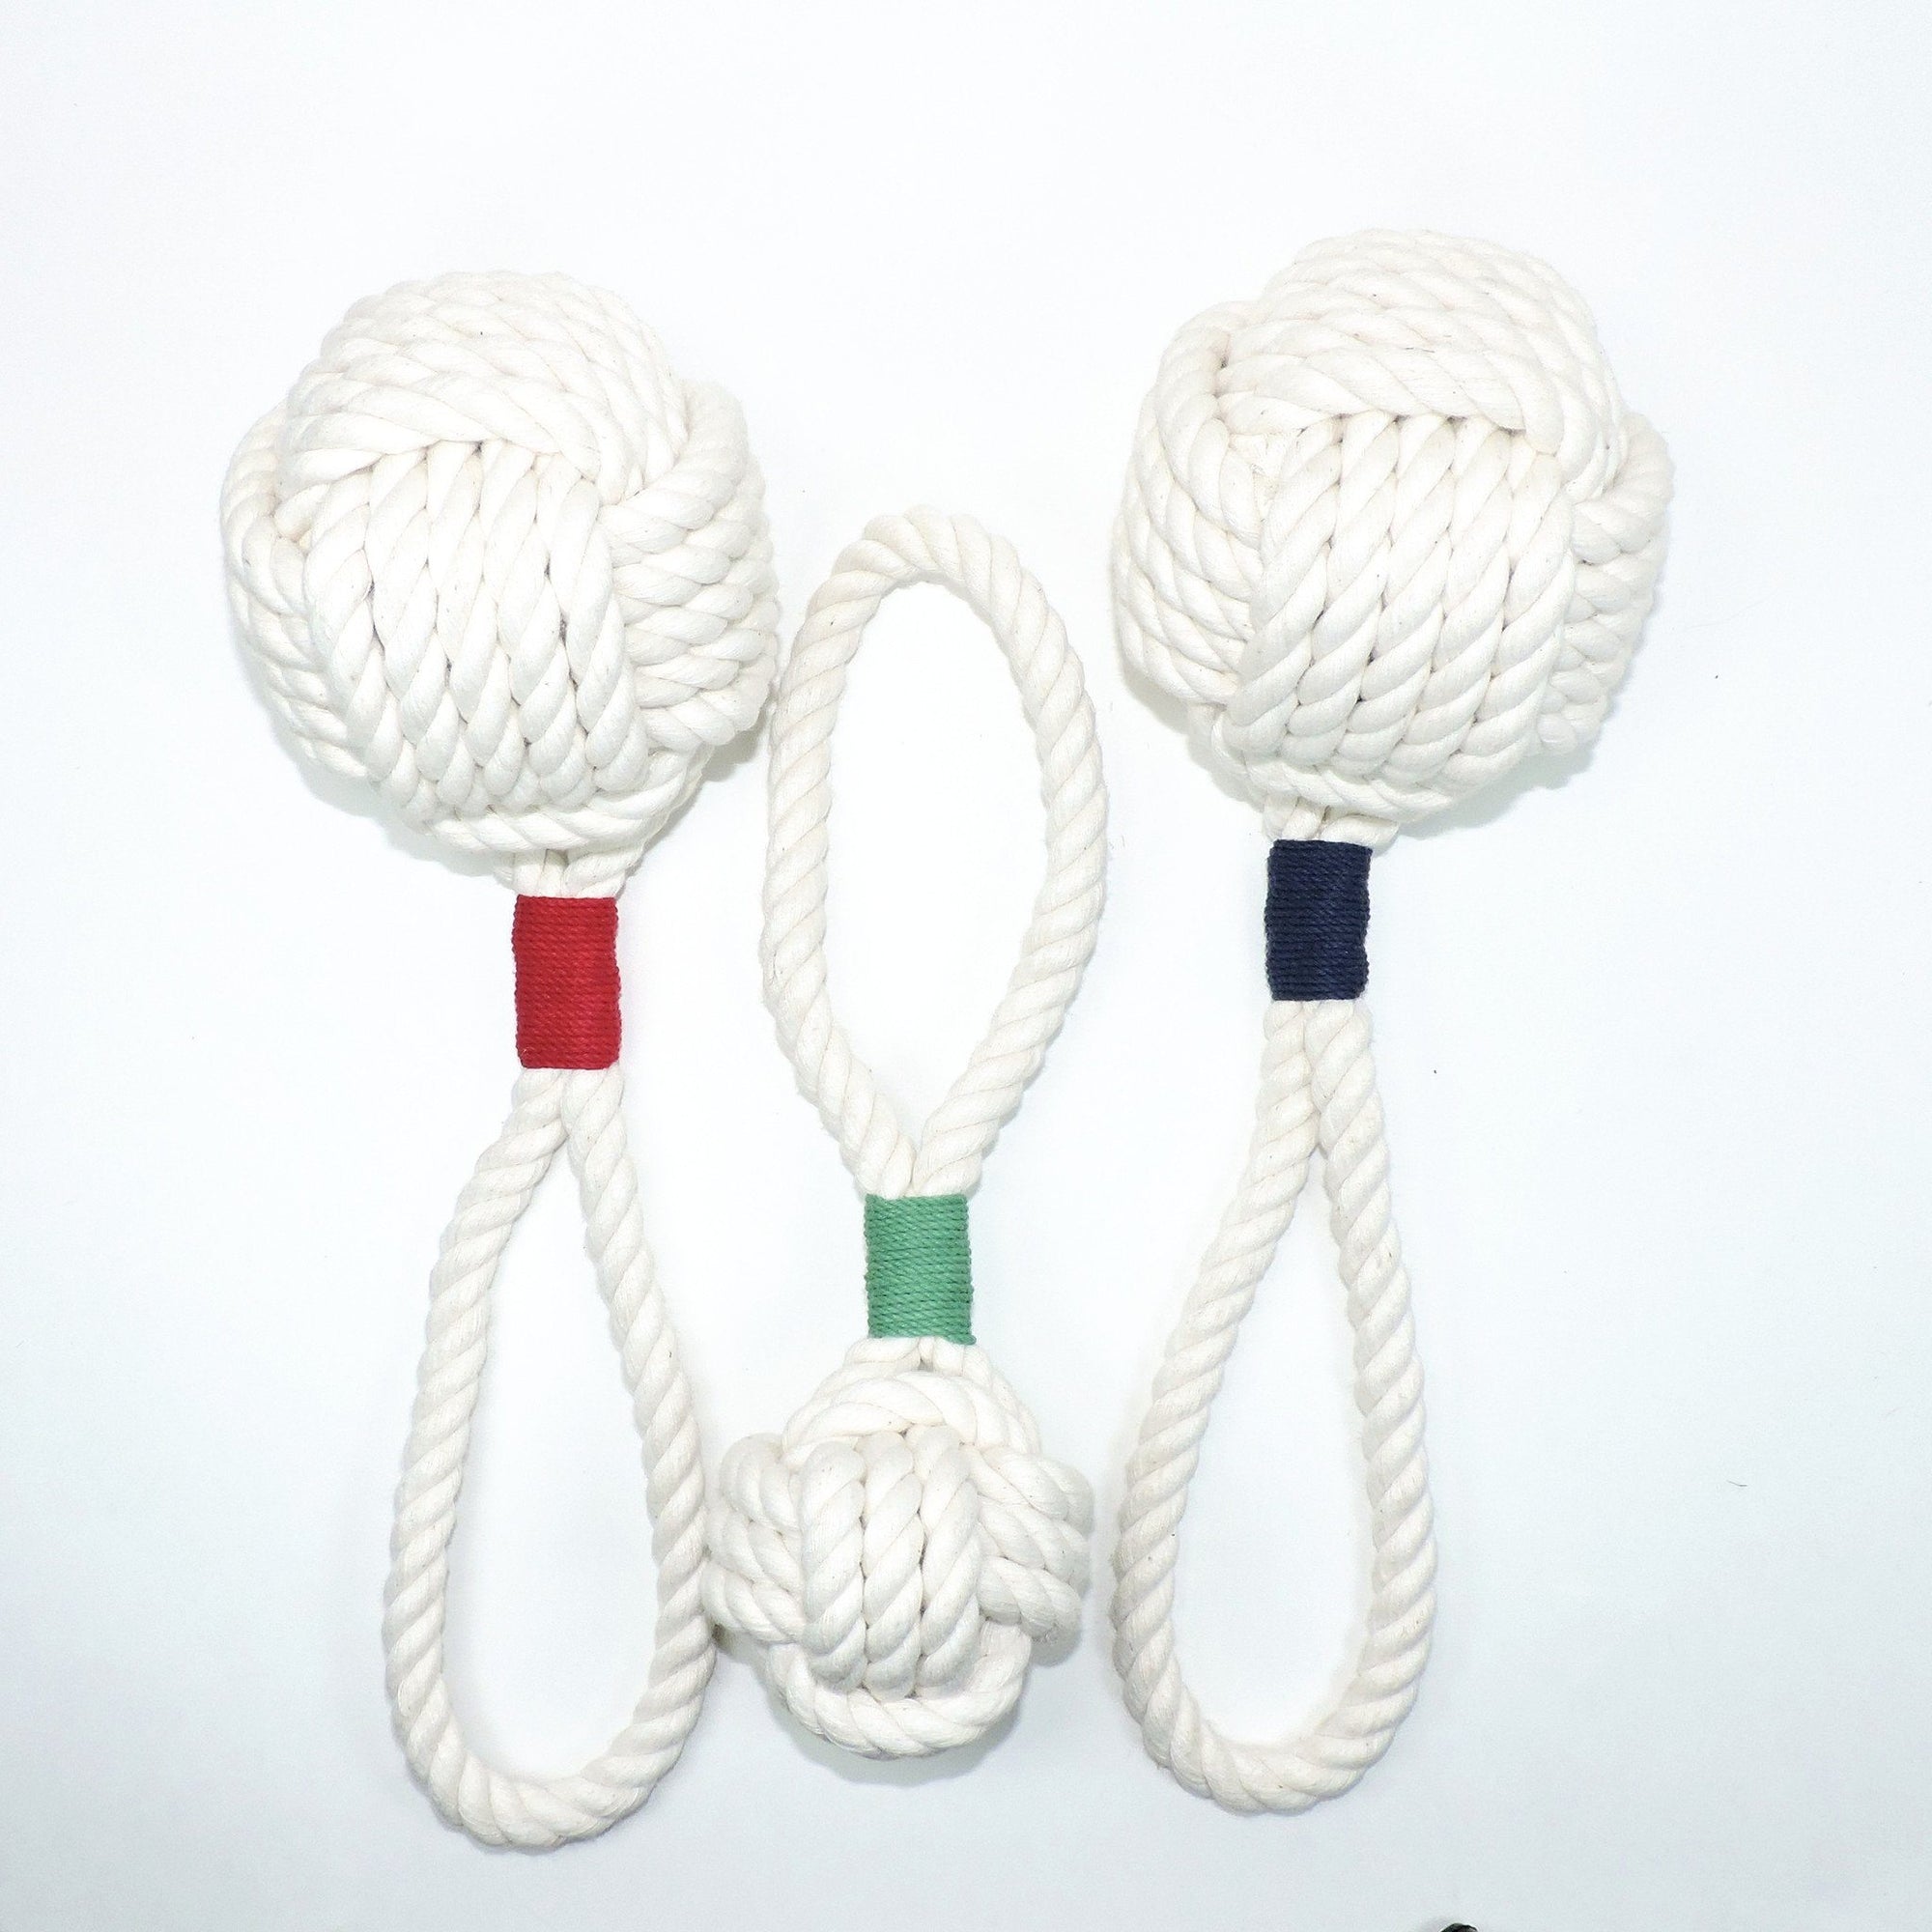 Nautical Knot Monkey Fist Rope Dog Toy handmade at Mystic Knotwork